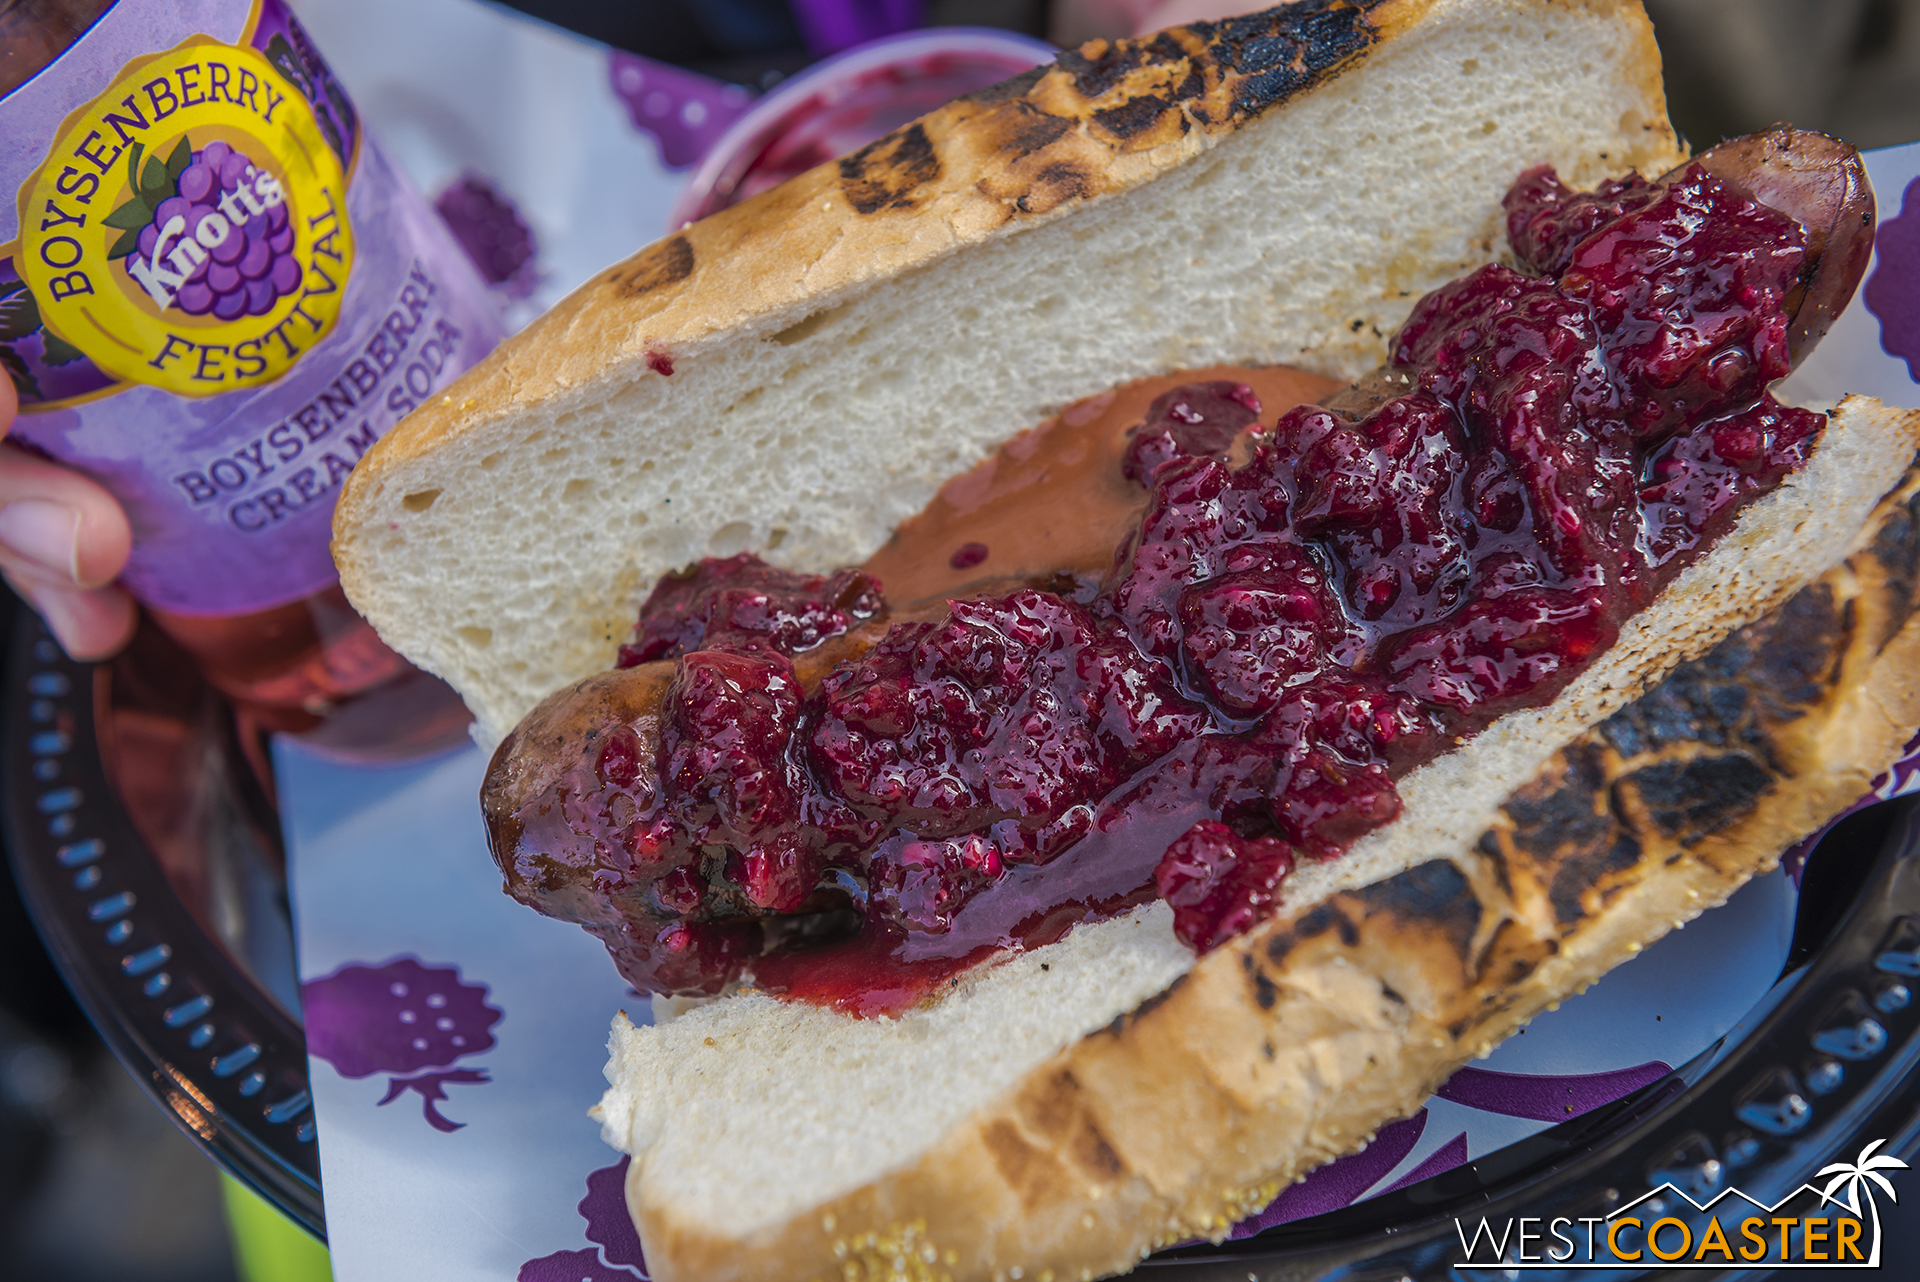  Boysenberry Sausage on a Bun.&nbsp; Easily the most flavorful and satisfying item, and a great sized serving too! 